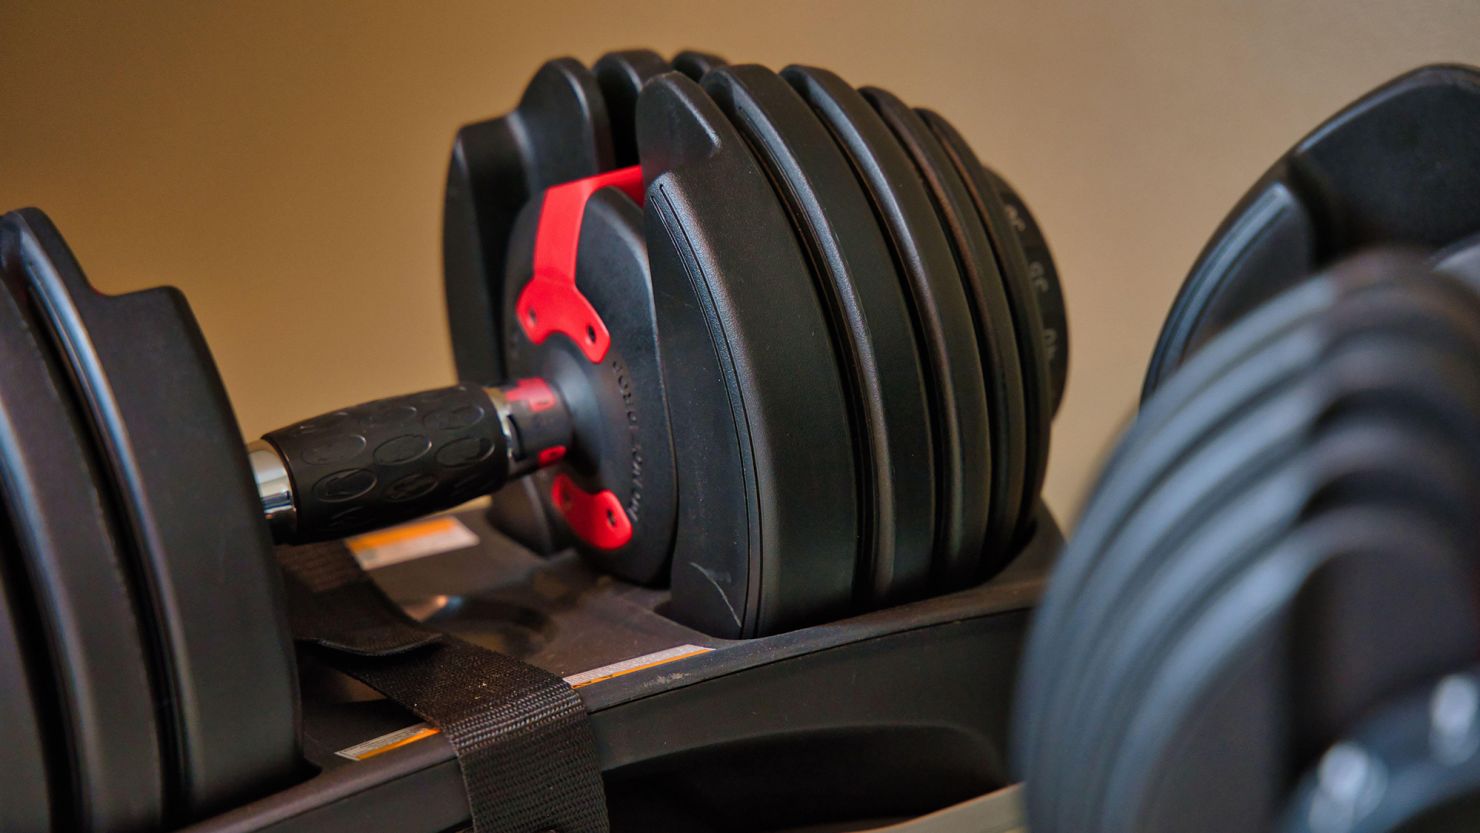 BowFlex, which makes exercise equipment like weights, filed for bankruptcy.